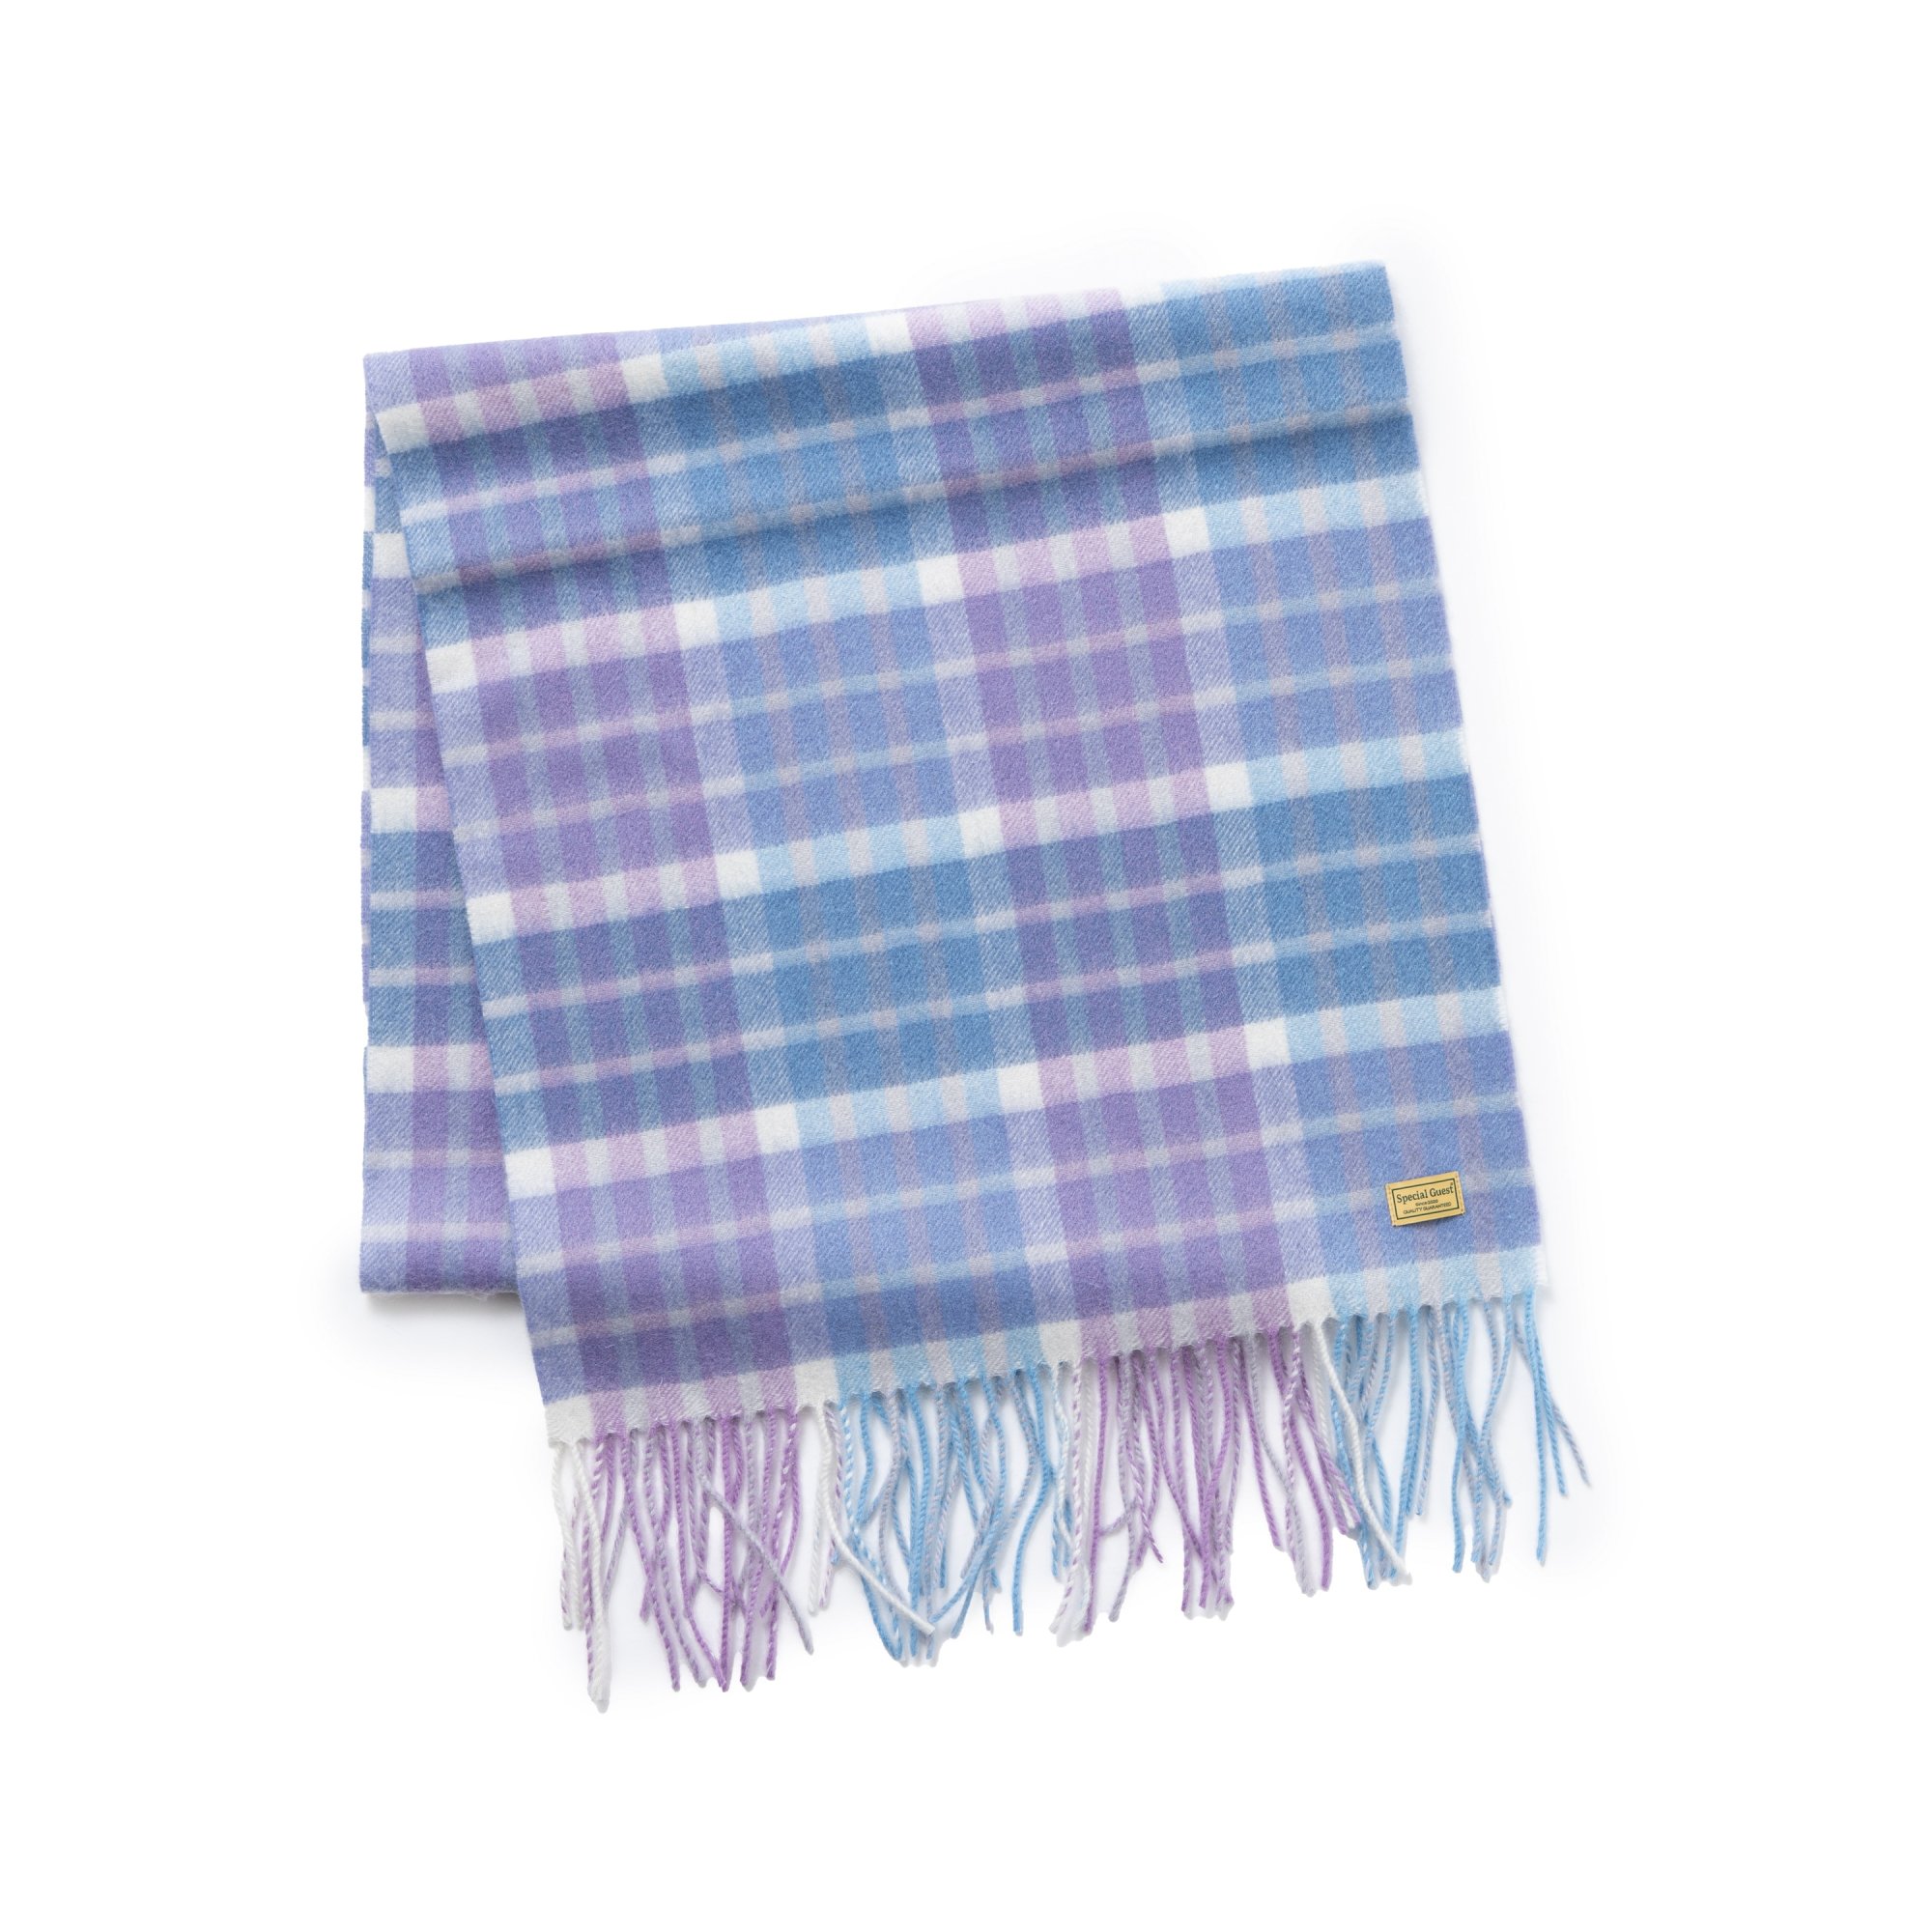 SPECIAL GUEST<br>SG Check scarf<br>